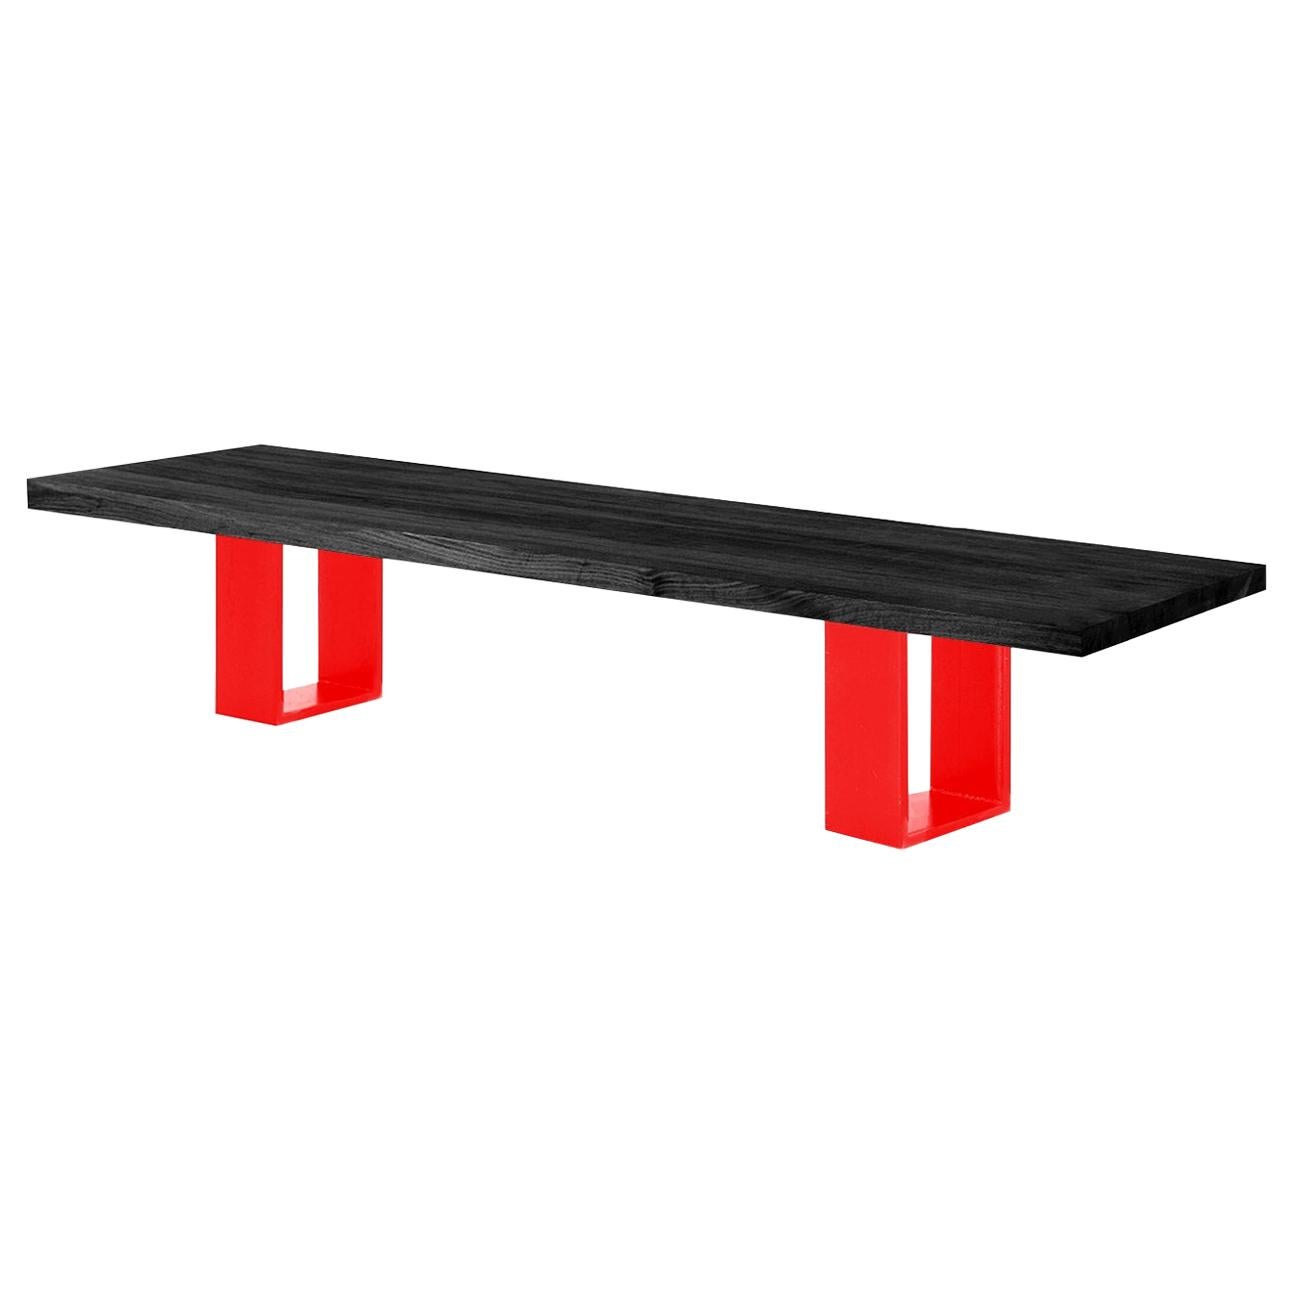 Newton, 63 Inches Black Vulcano and Red Iron Legs Bench, Made in Italy